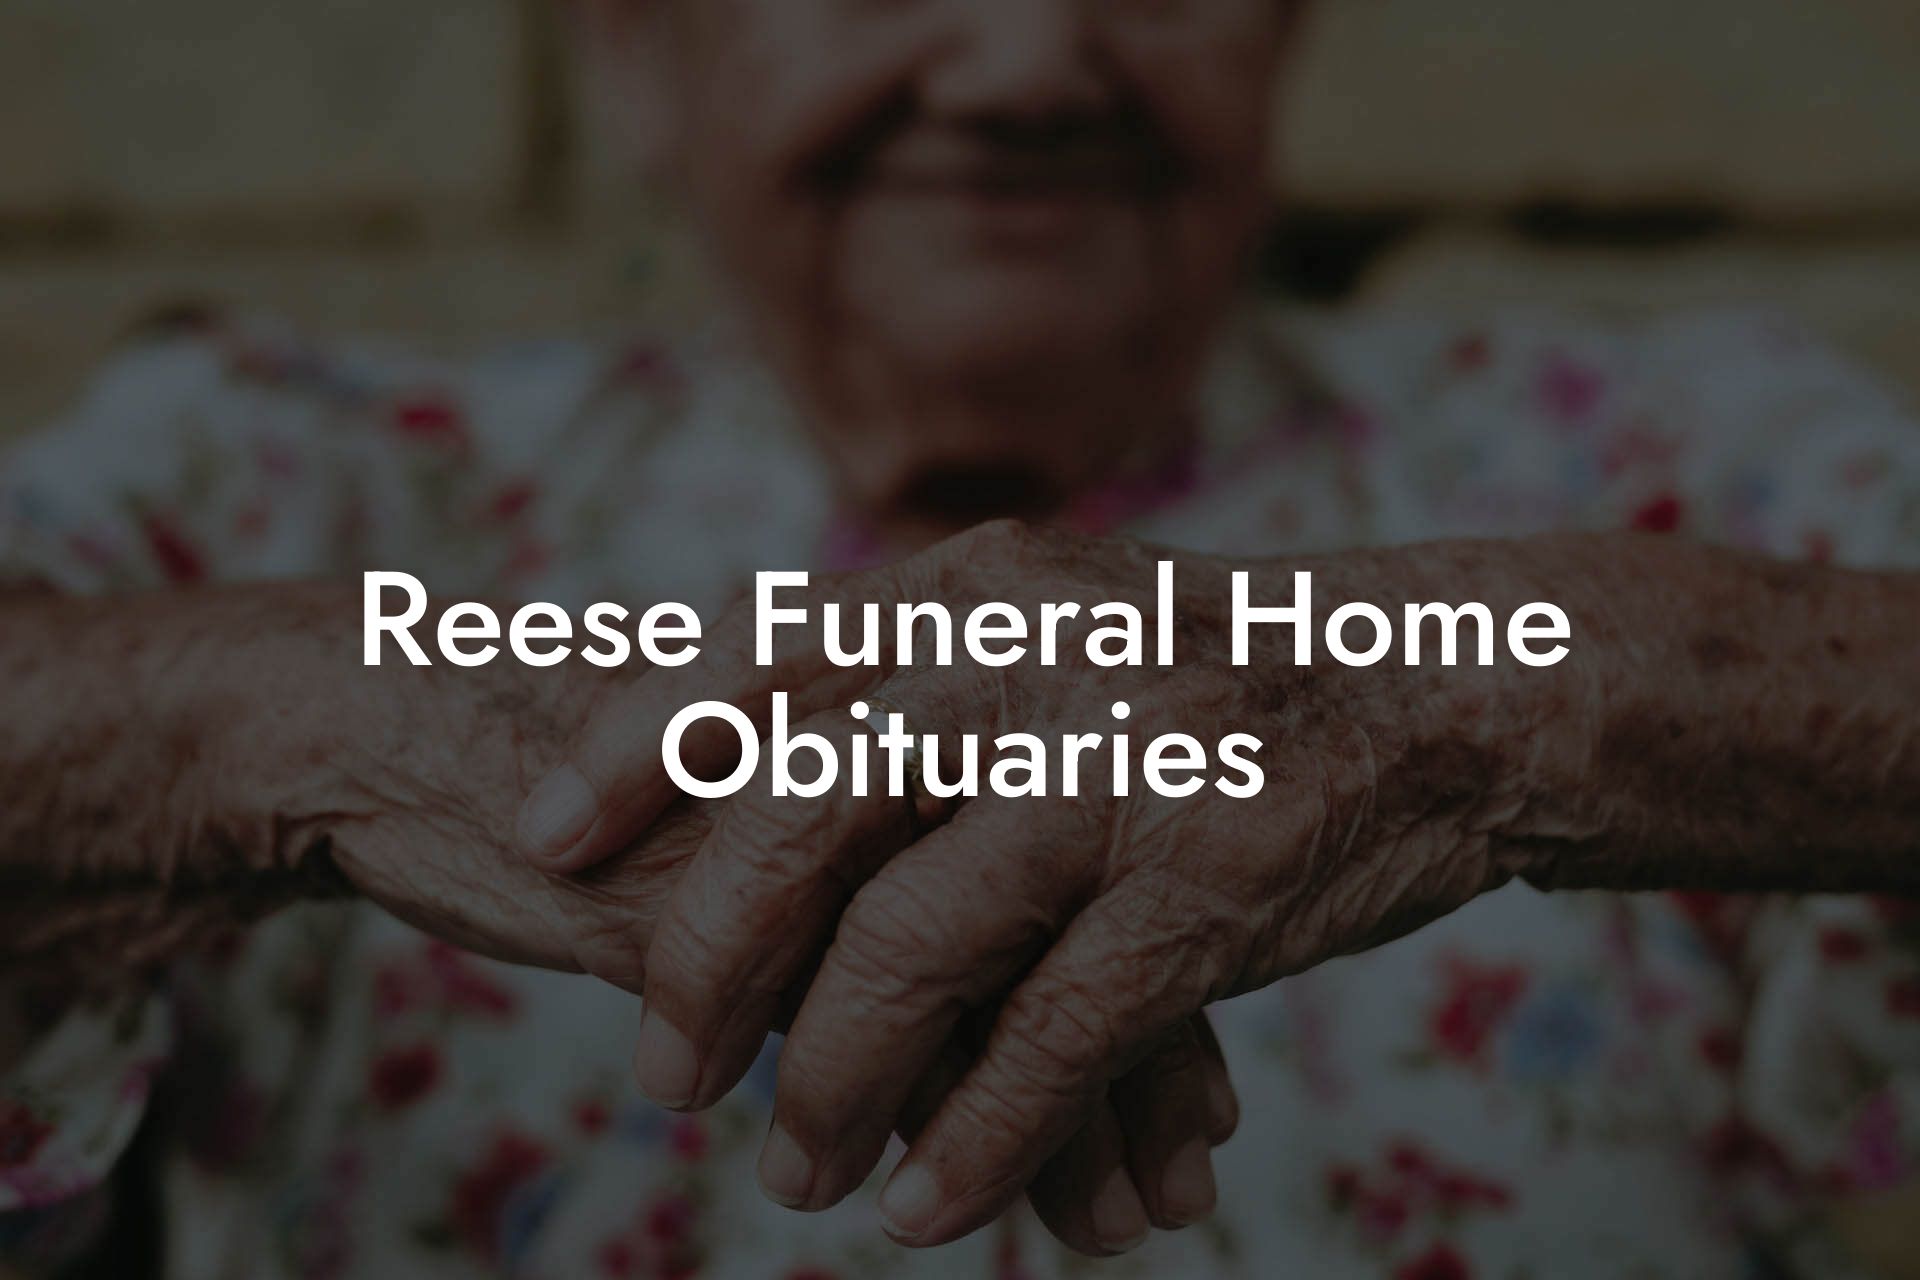 Reese Funeral Home Obituaries